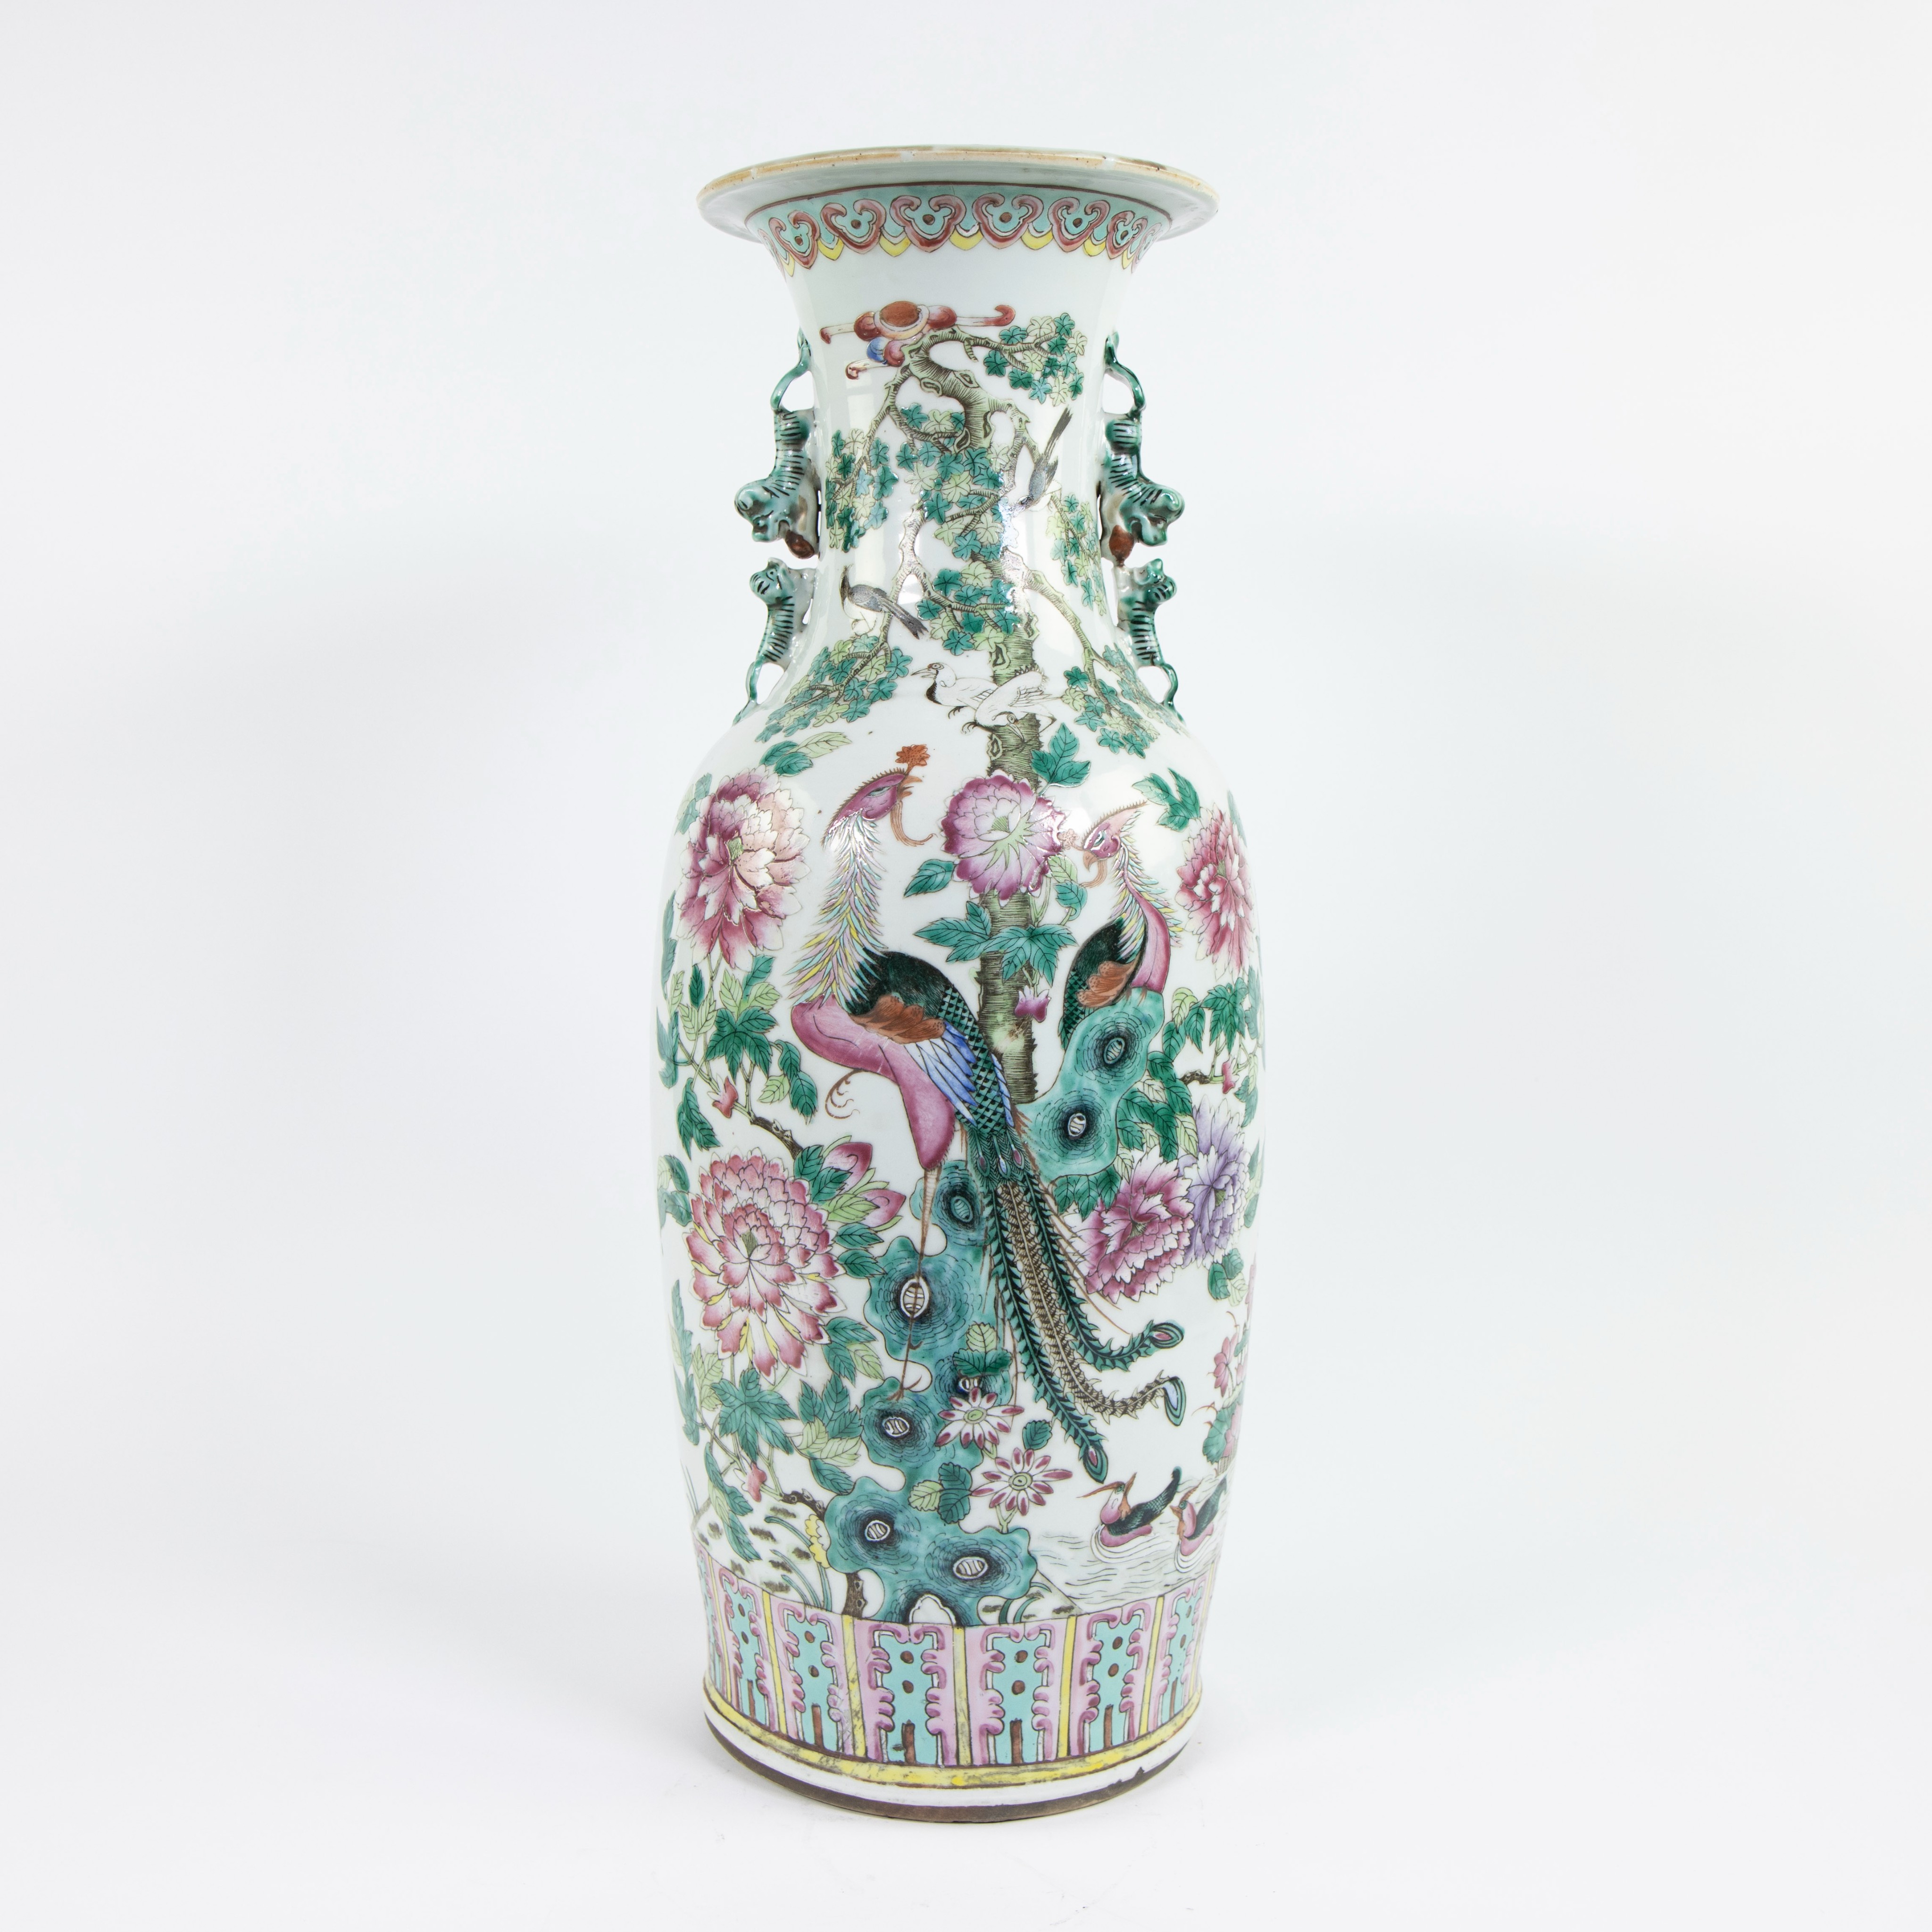 A fine Chinese famille rose baluster vase with birds, trees, peonis, blossoming prunes and foo lions